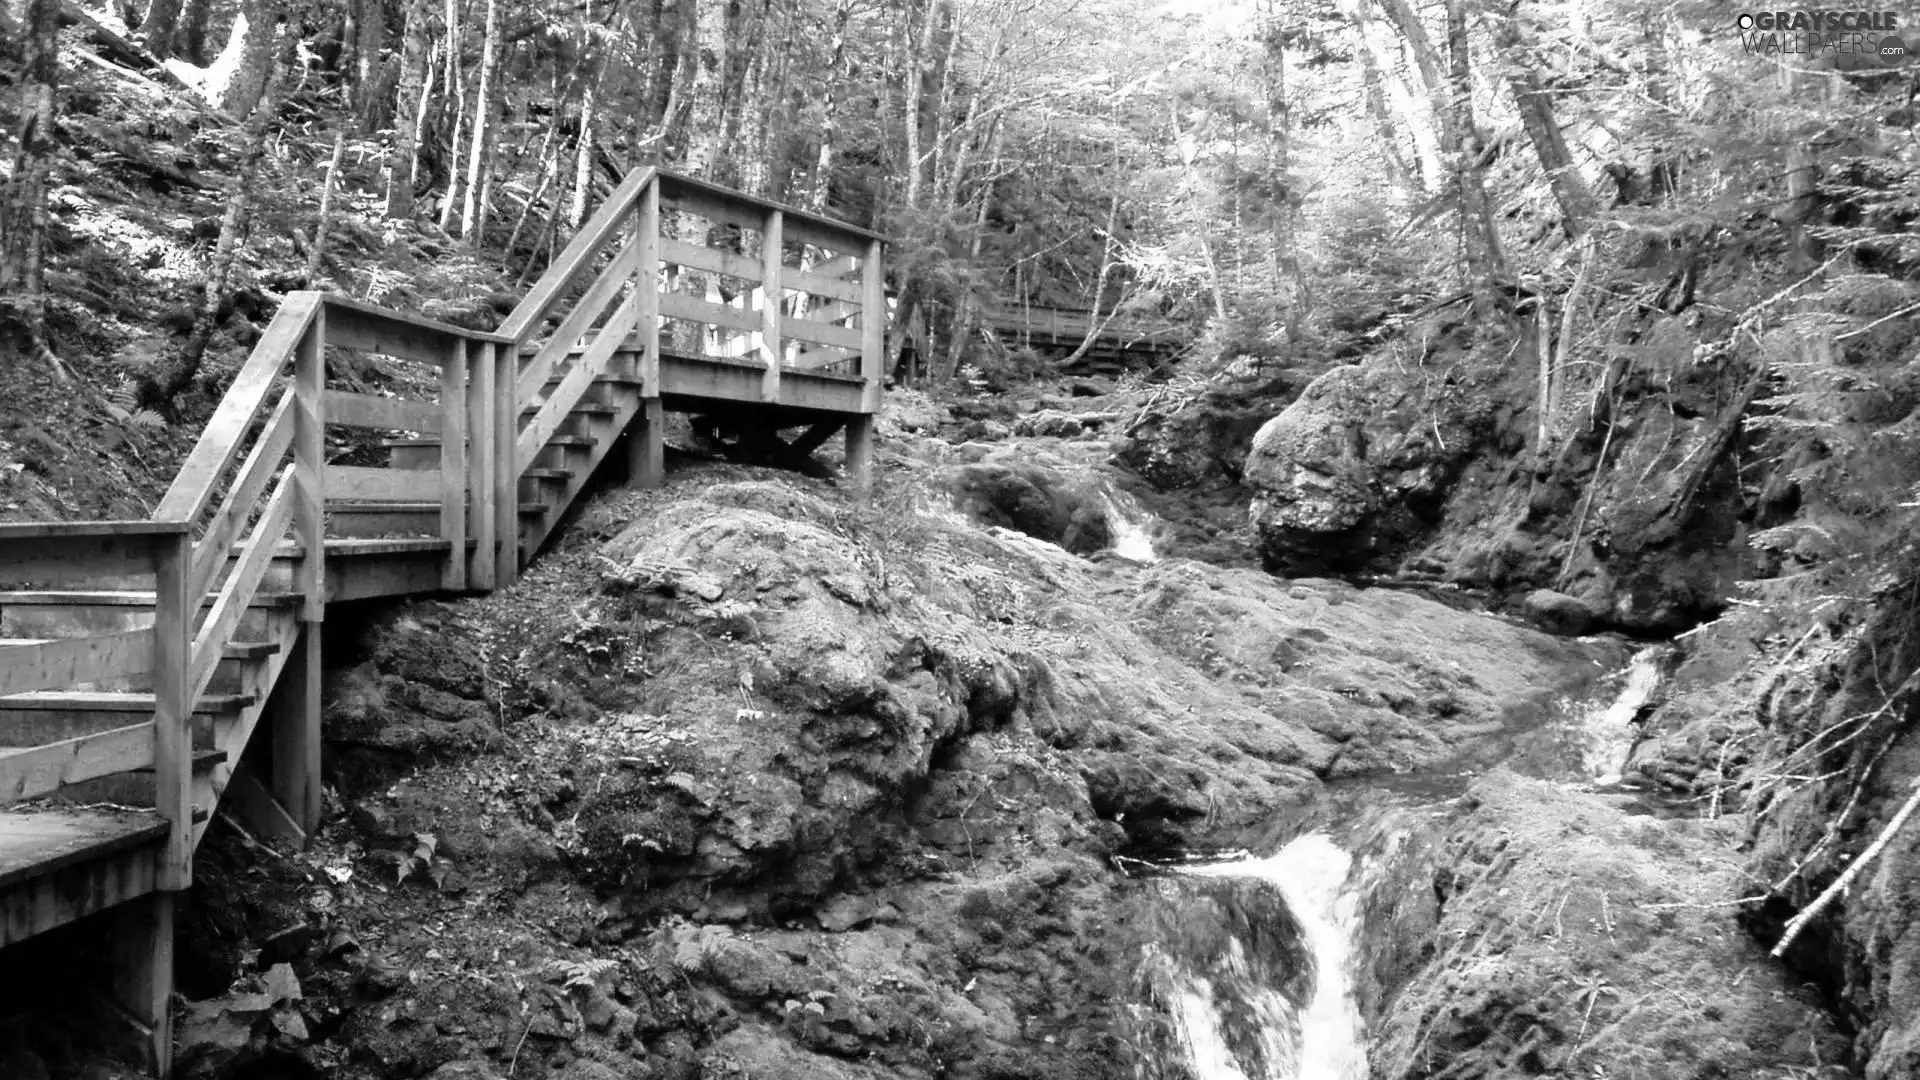 Stairs, forest, stream